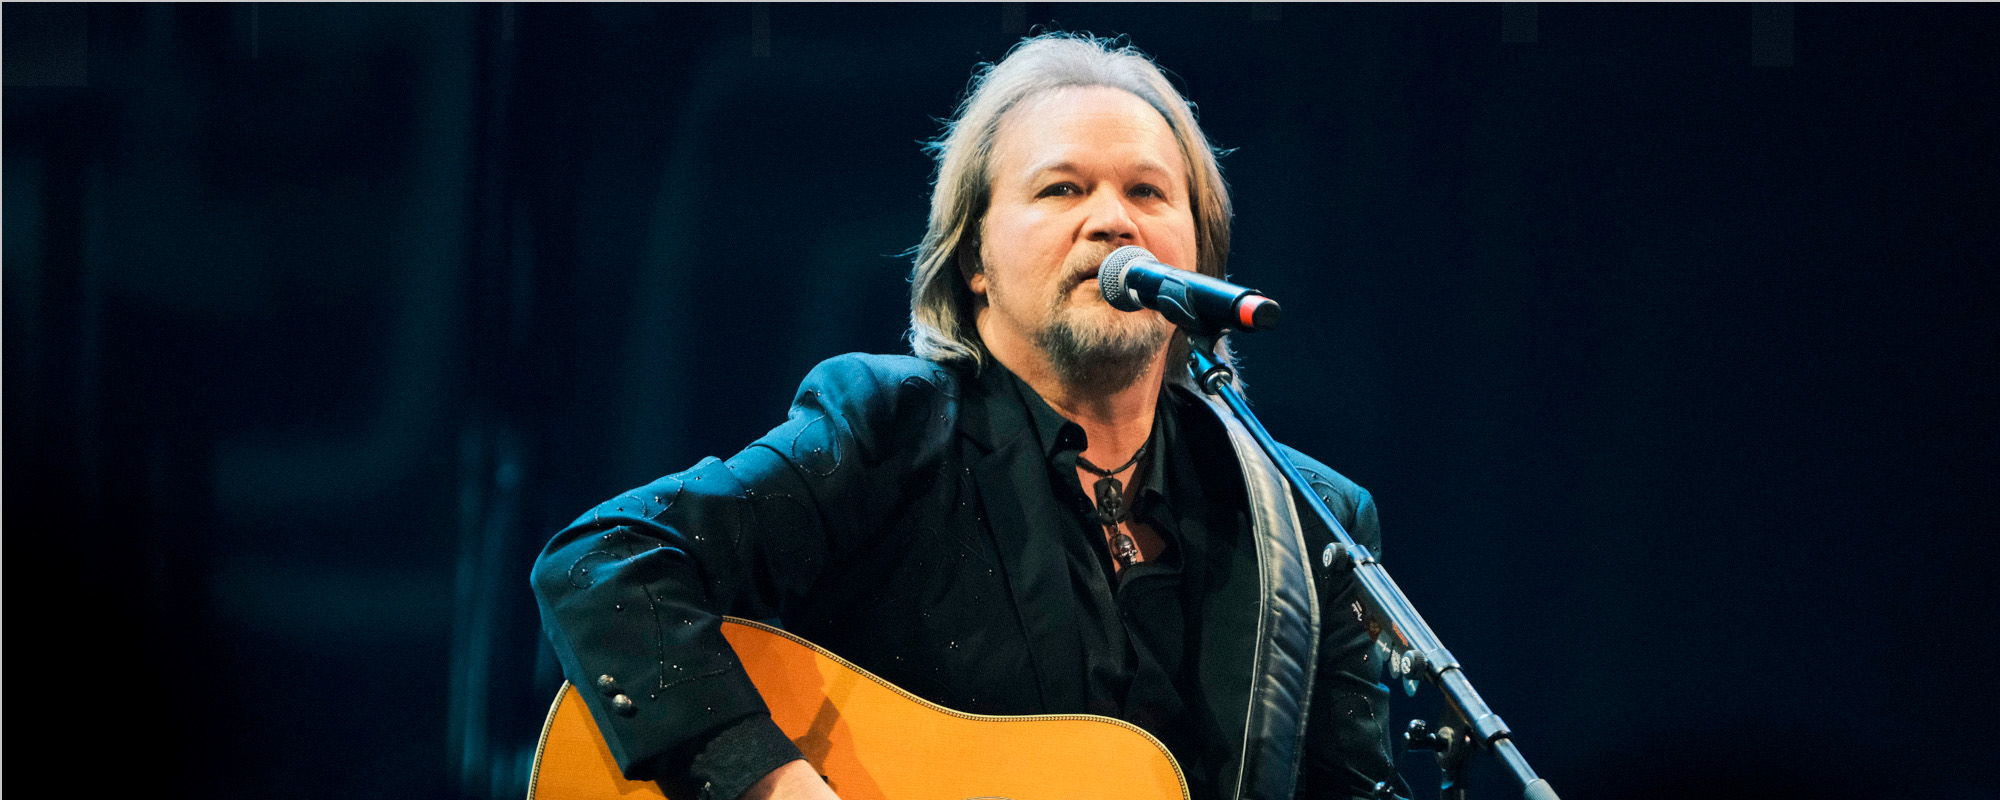 Travis Tritt’s Album, ‘Proud of the Country’ Hits Streaming Services for First Time Ever